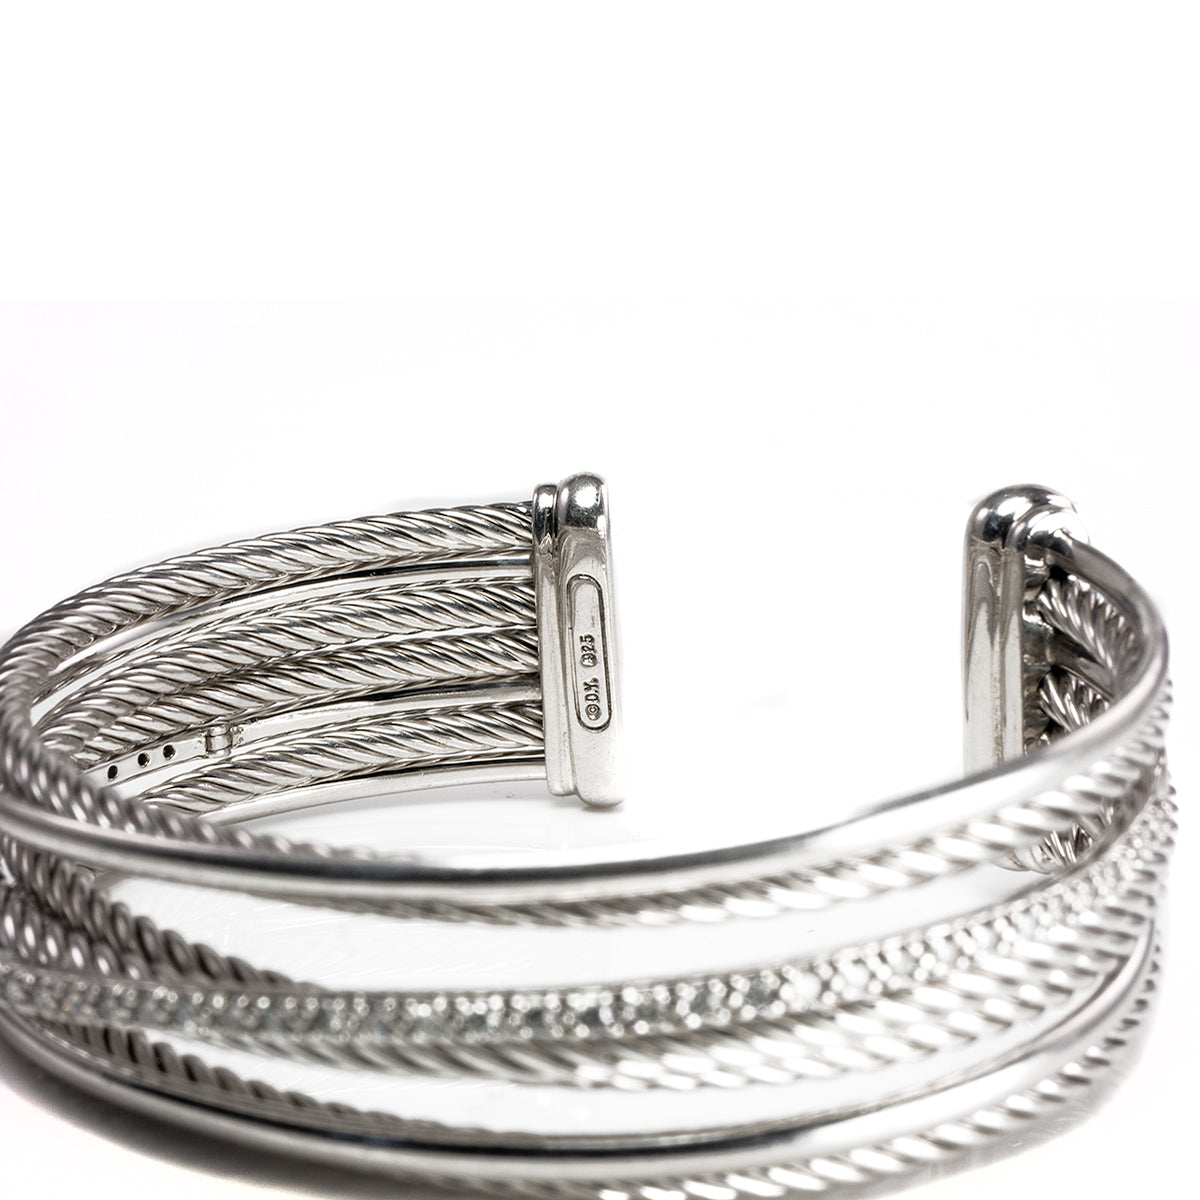 Great Lakes Boutique David Yurman Crossover Four Row Cuff Bracelet with Diamonds